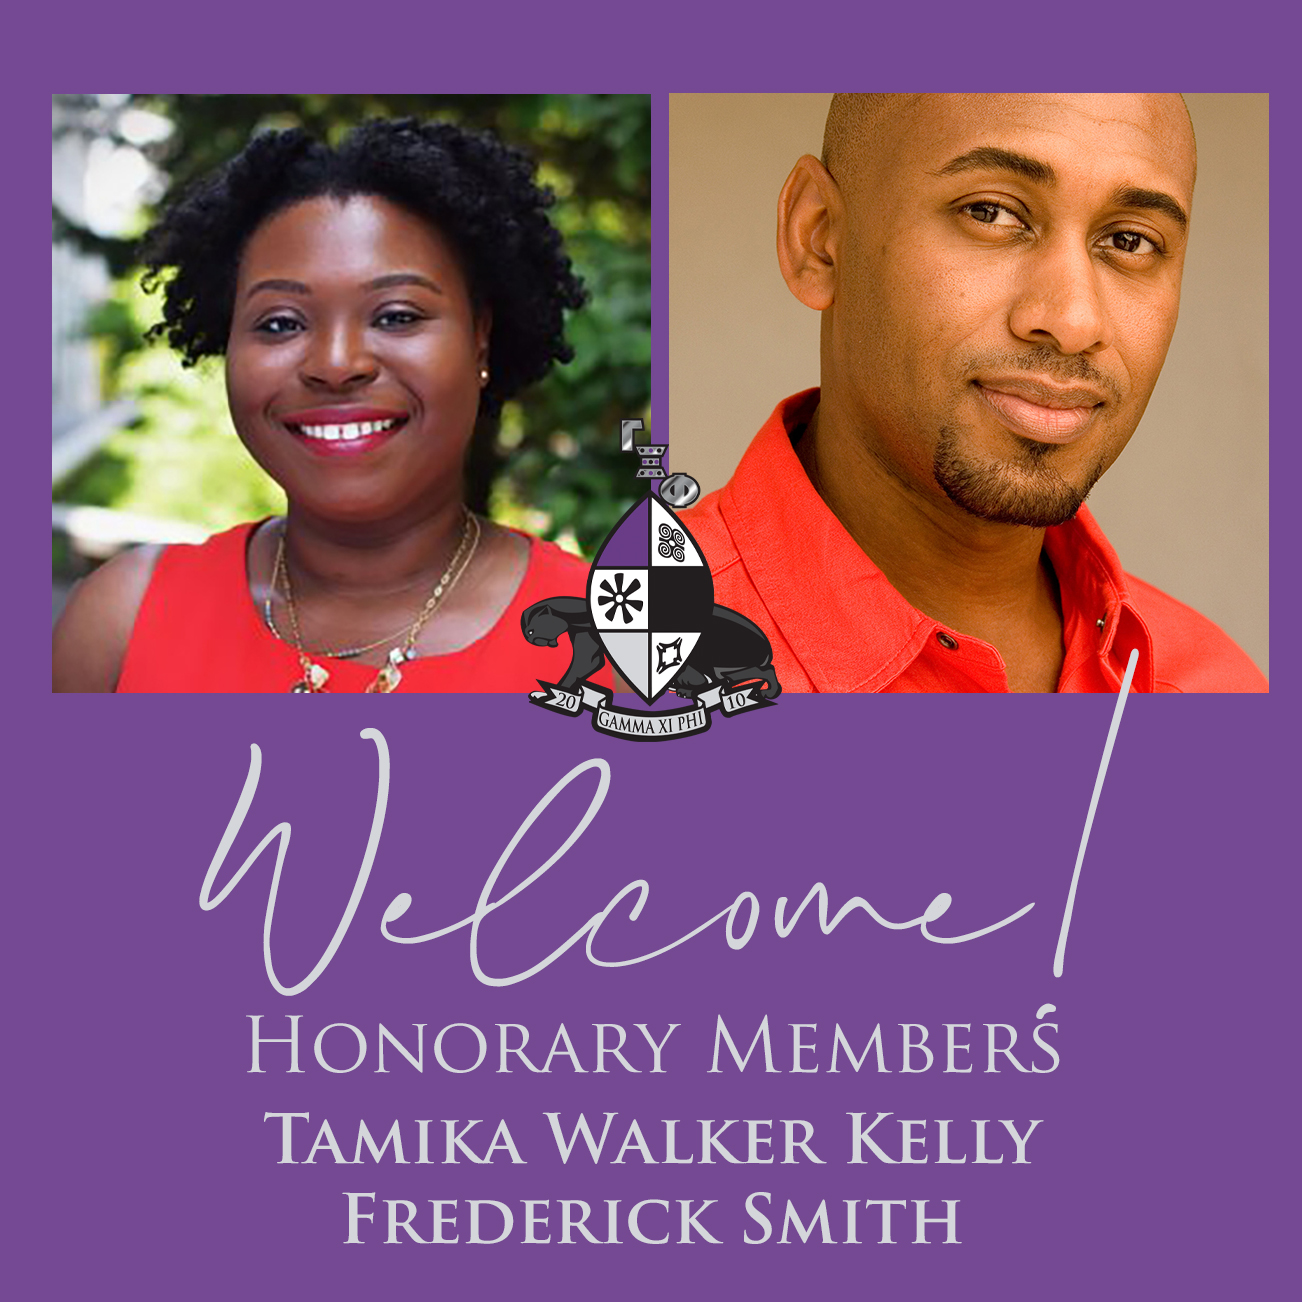 Collage of honorary members Tamika Walker Kelly and Frederick Smith with the message "Welcome!" Honorary members"